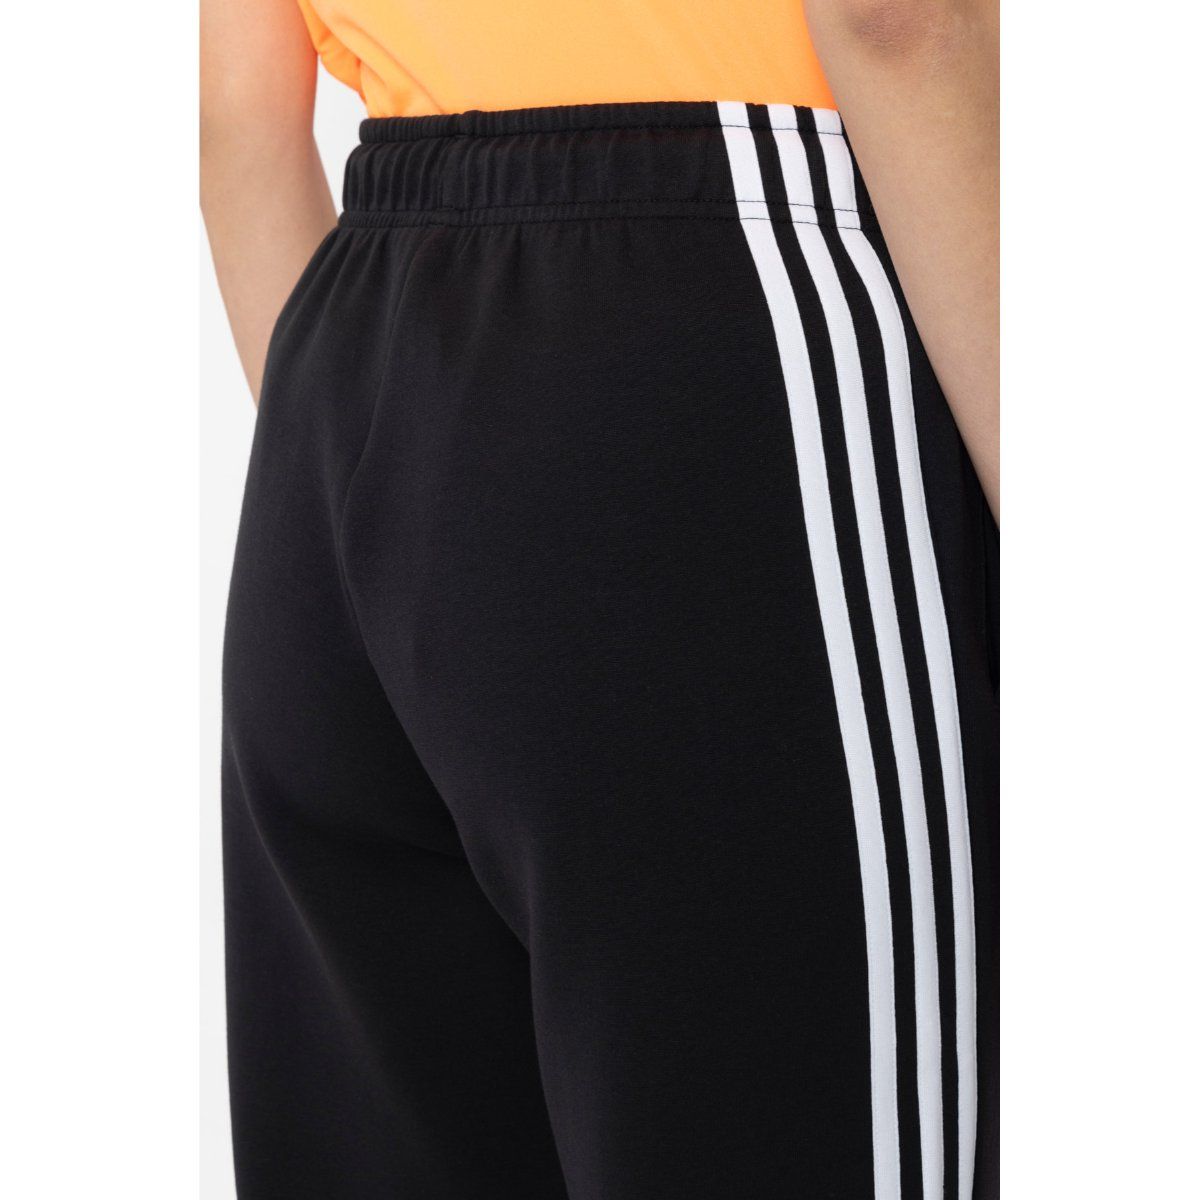 Adidas Slim Track Pant  Get Best Price from Manufacturers  Suppliers in  India